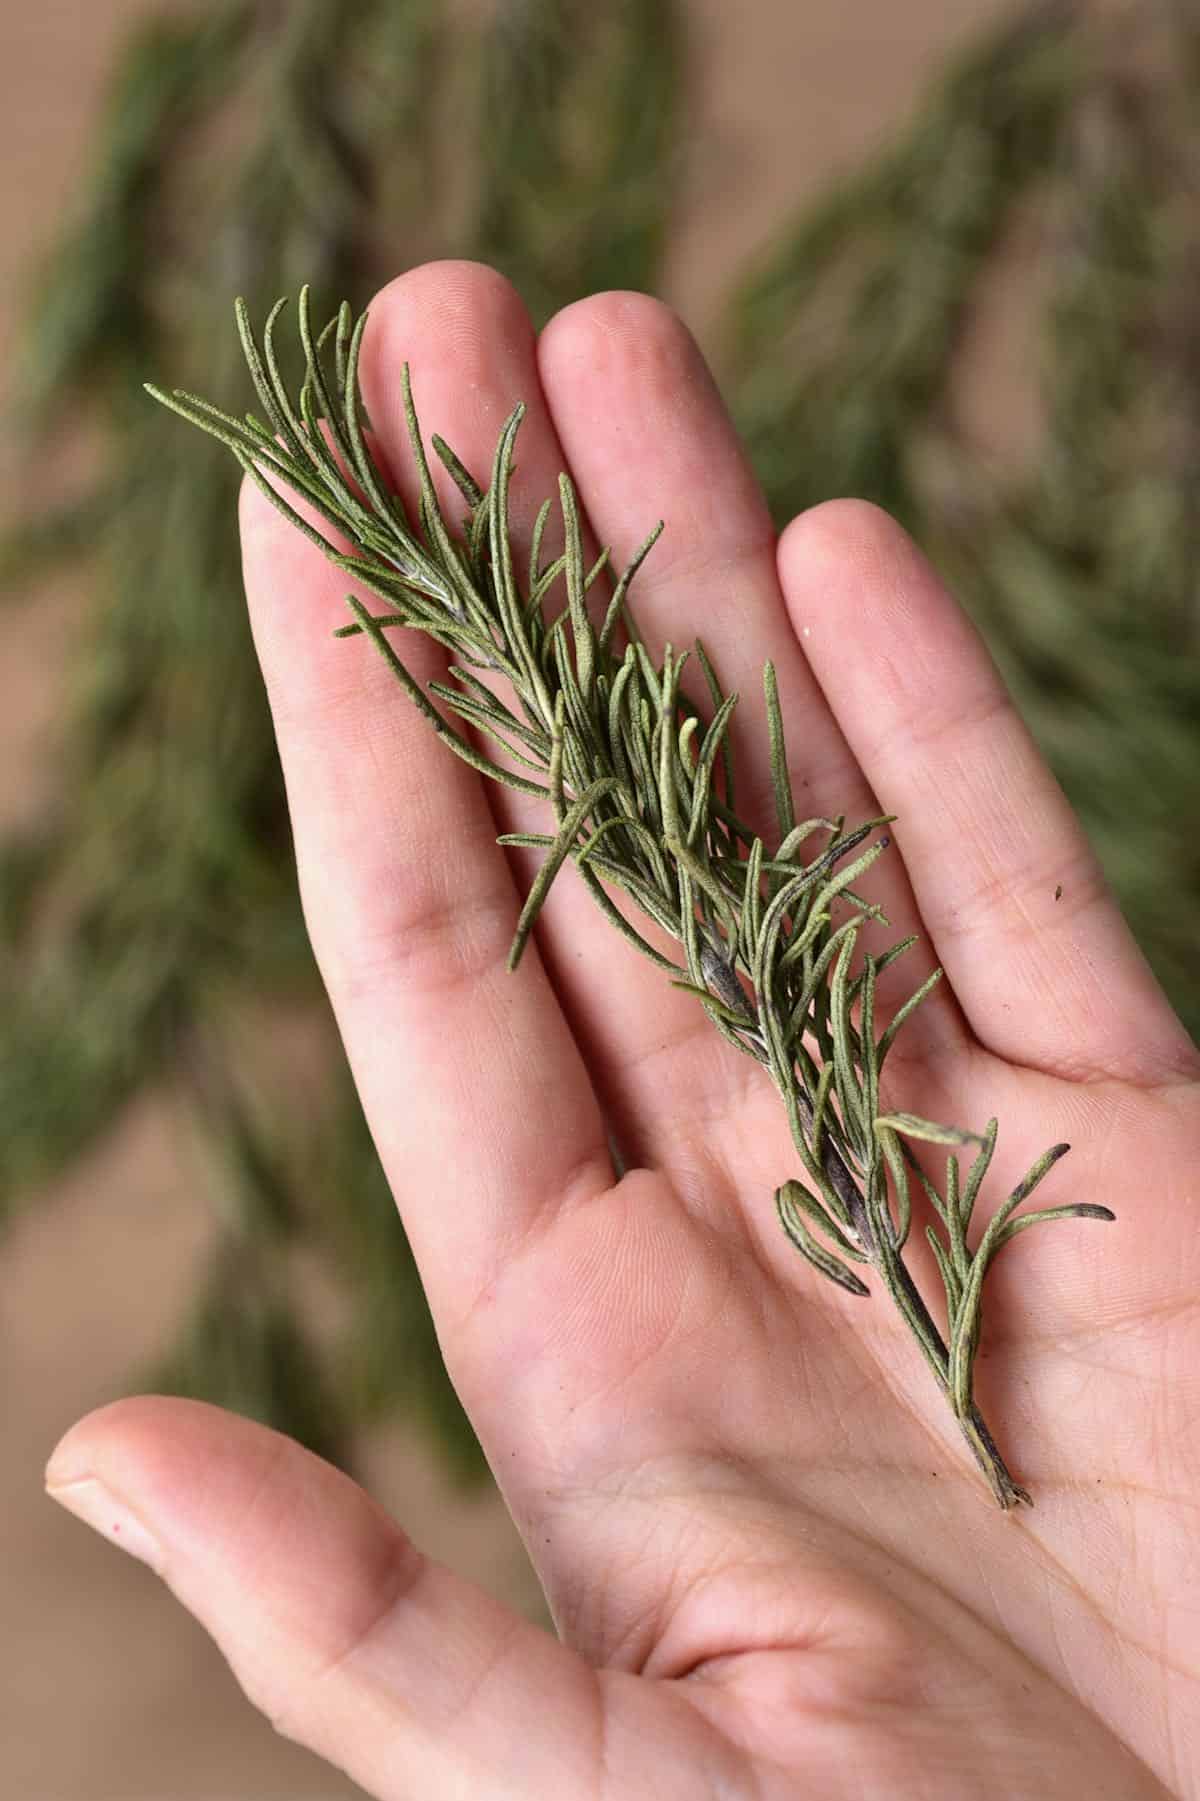 A sprig of dried rosemary in a hand